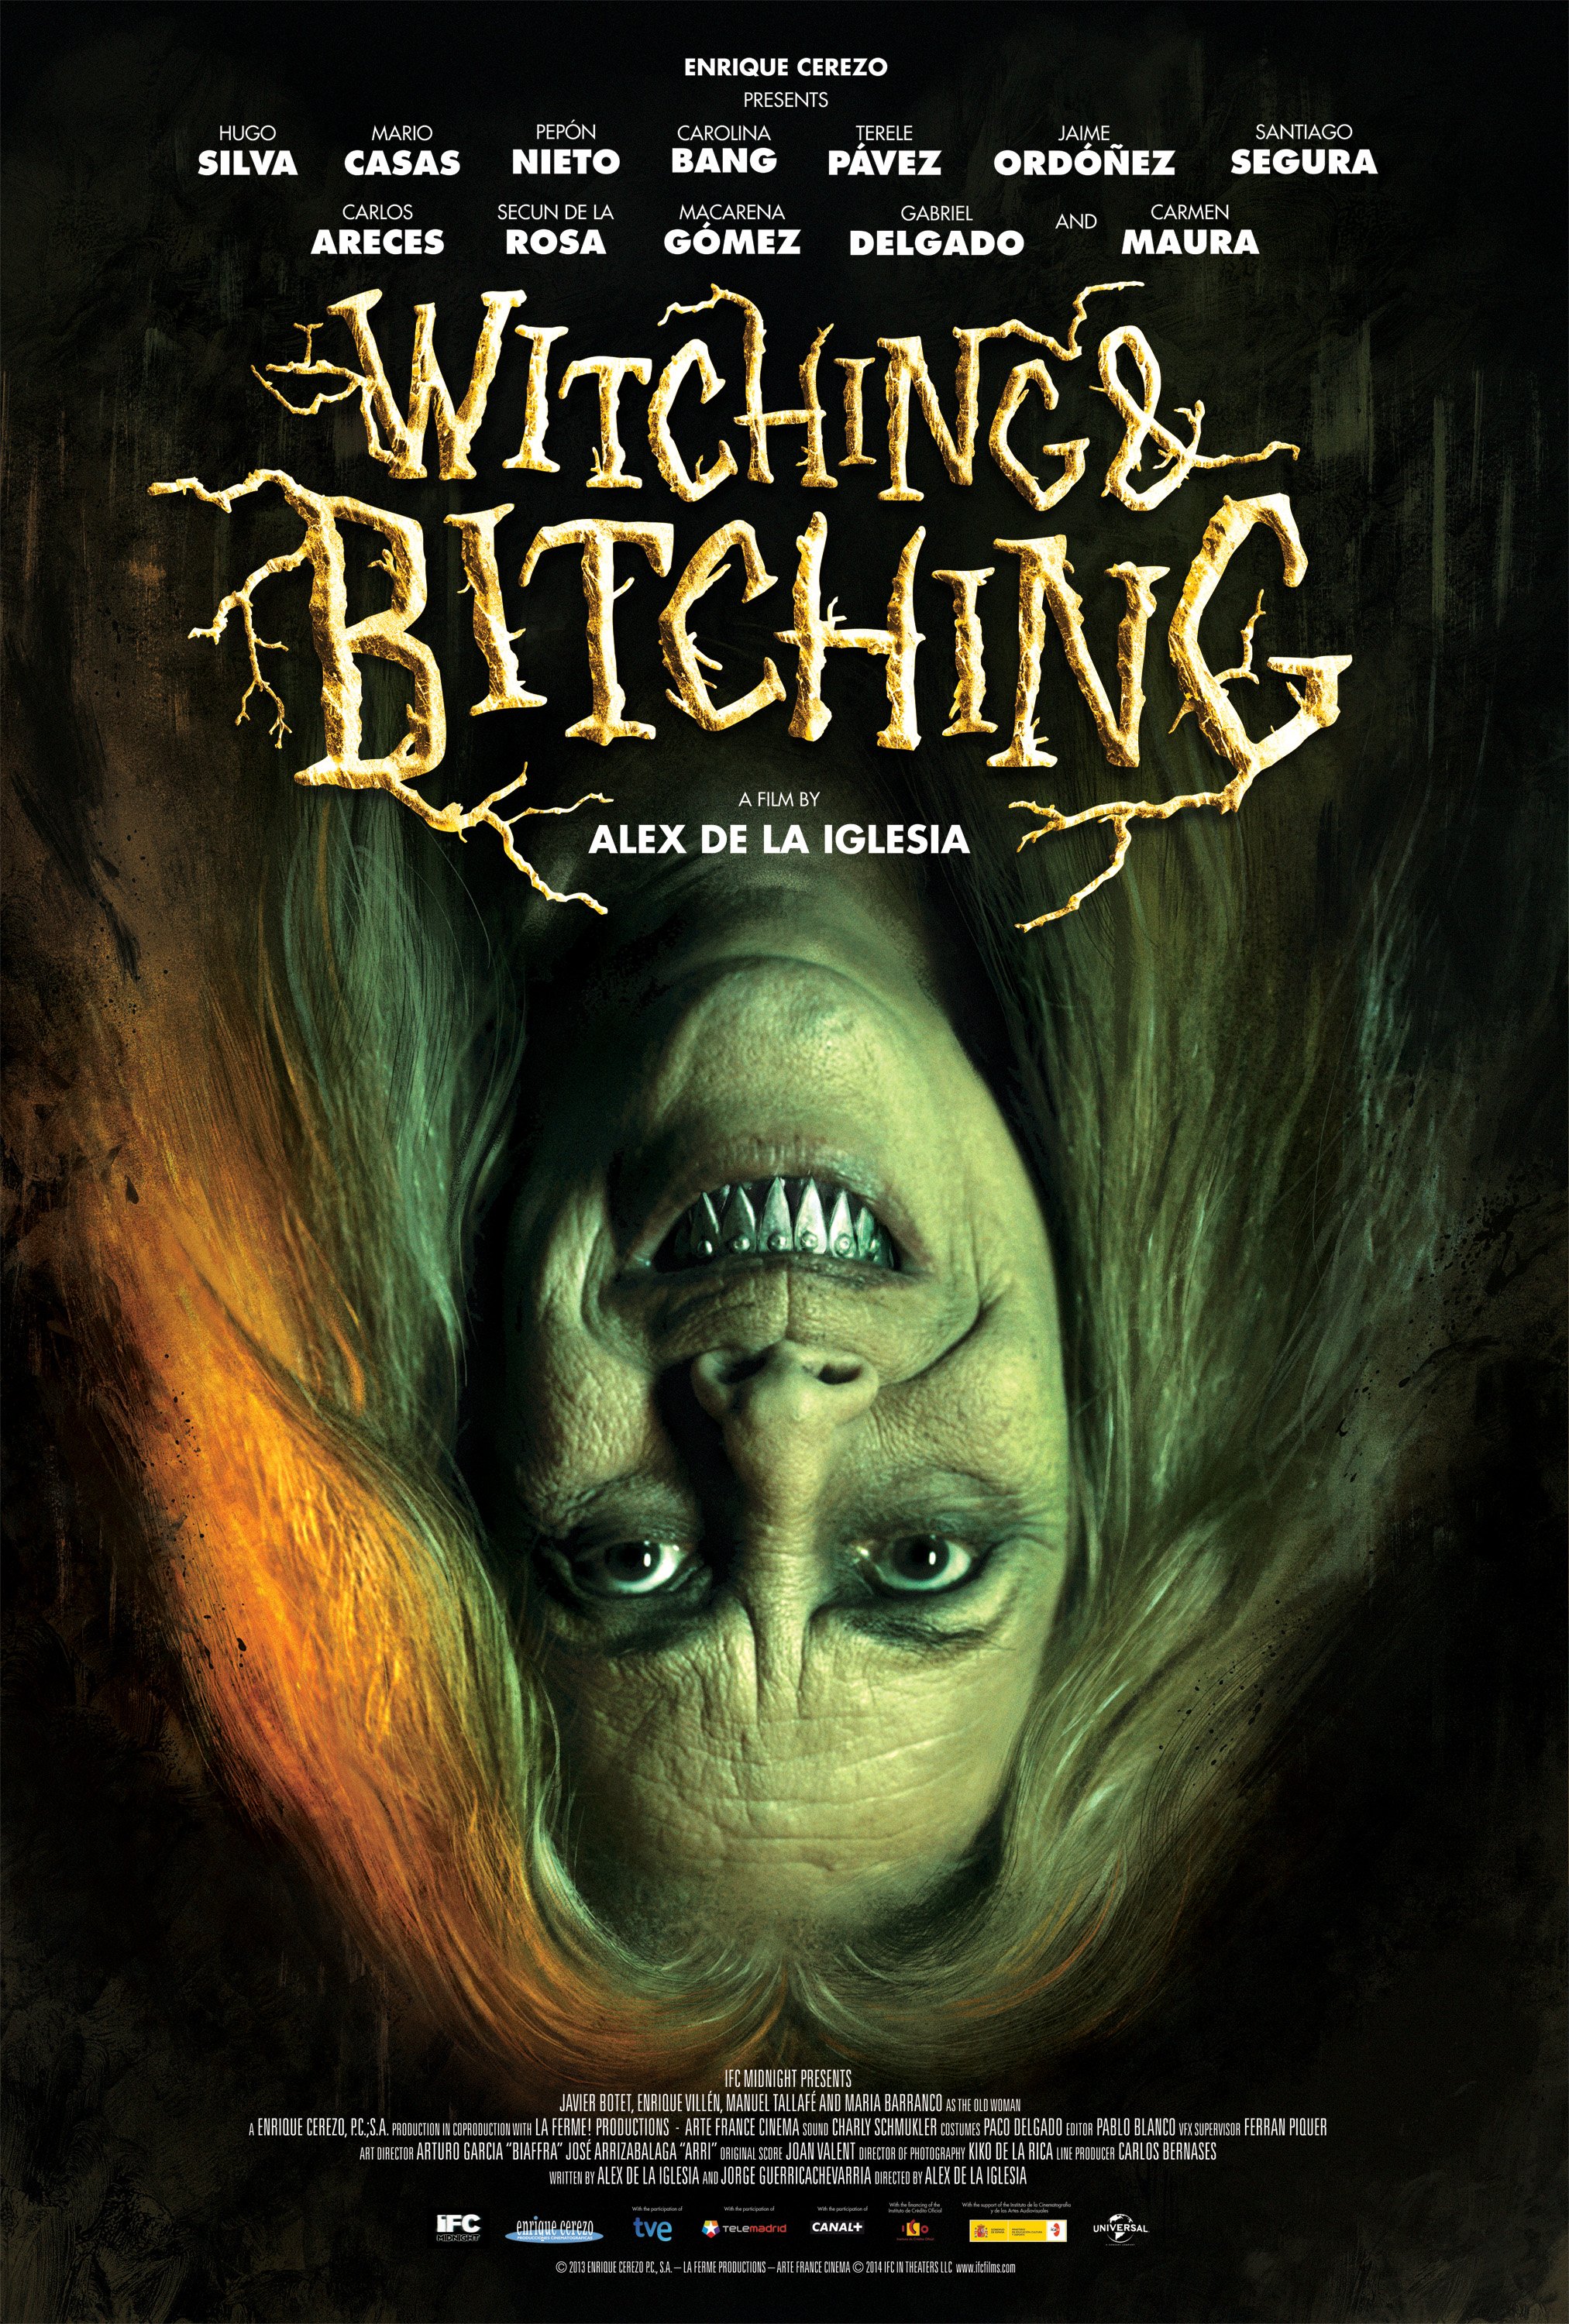 Poster of the movie Witching & Bitching